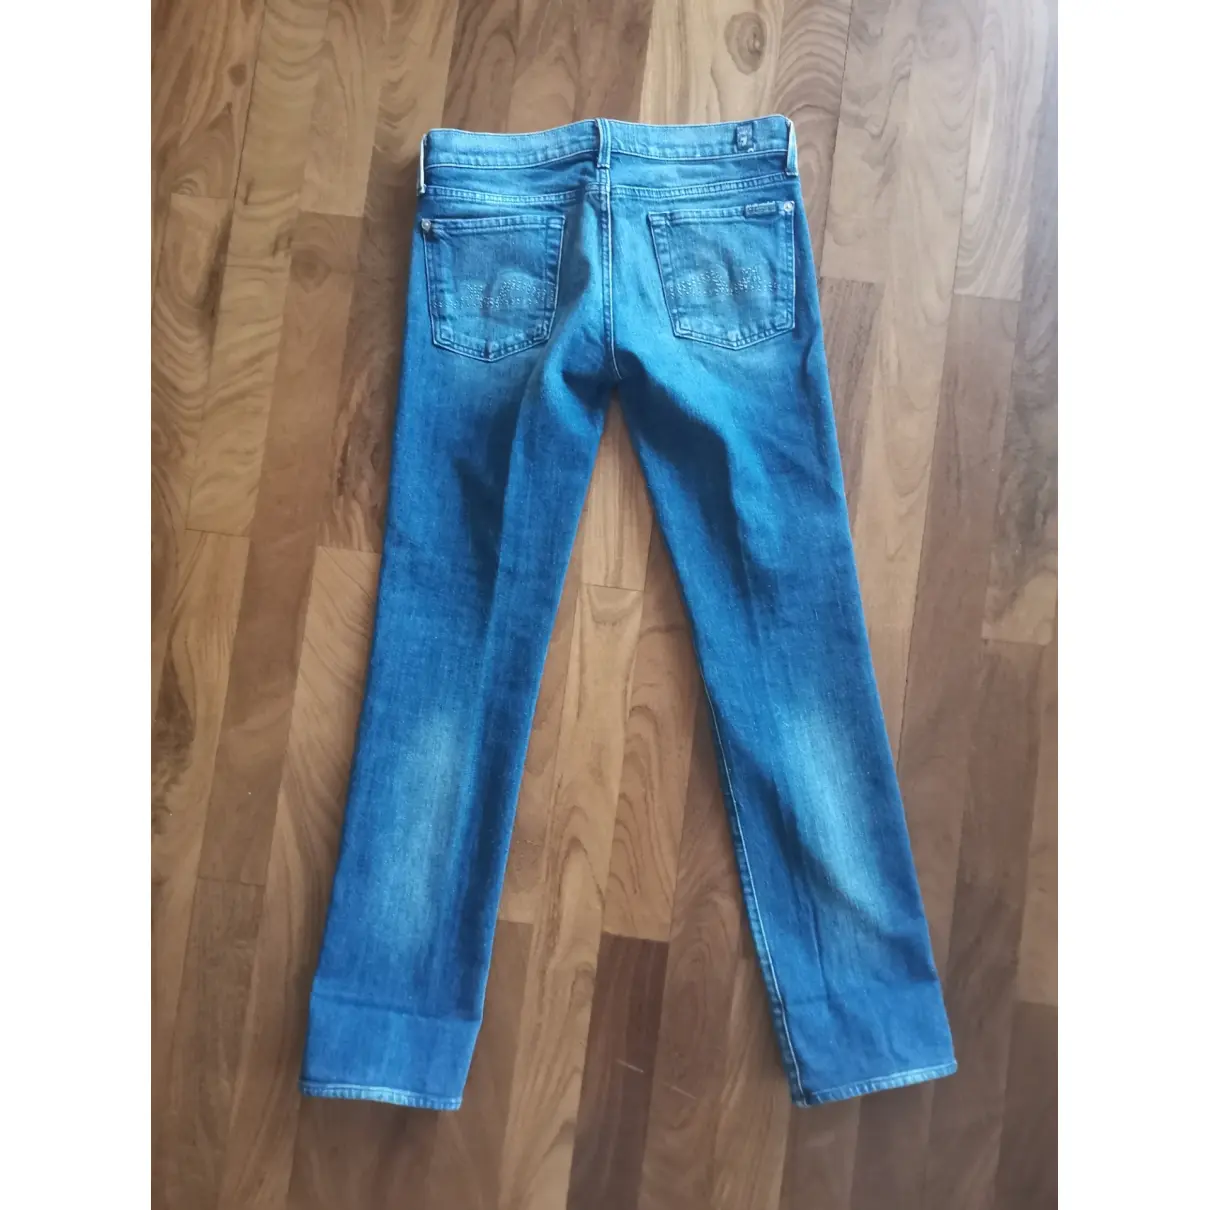 Buy 7 For All Mankind Straight pants online